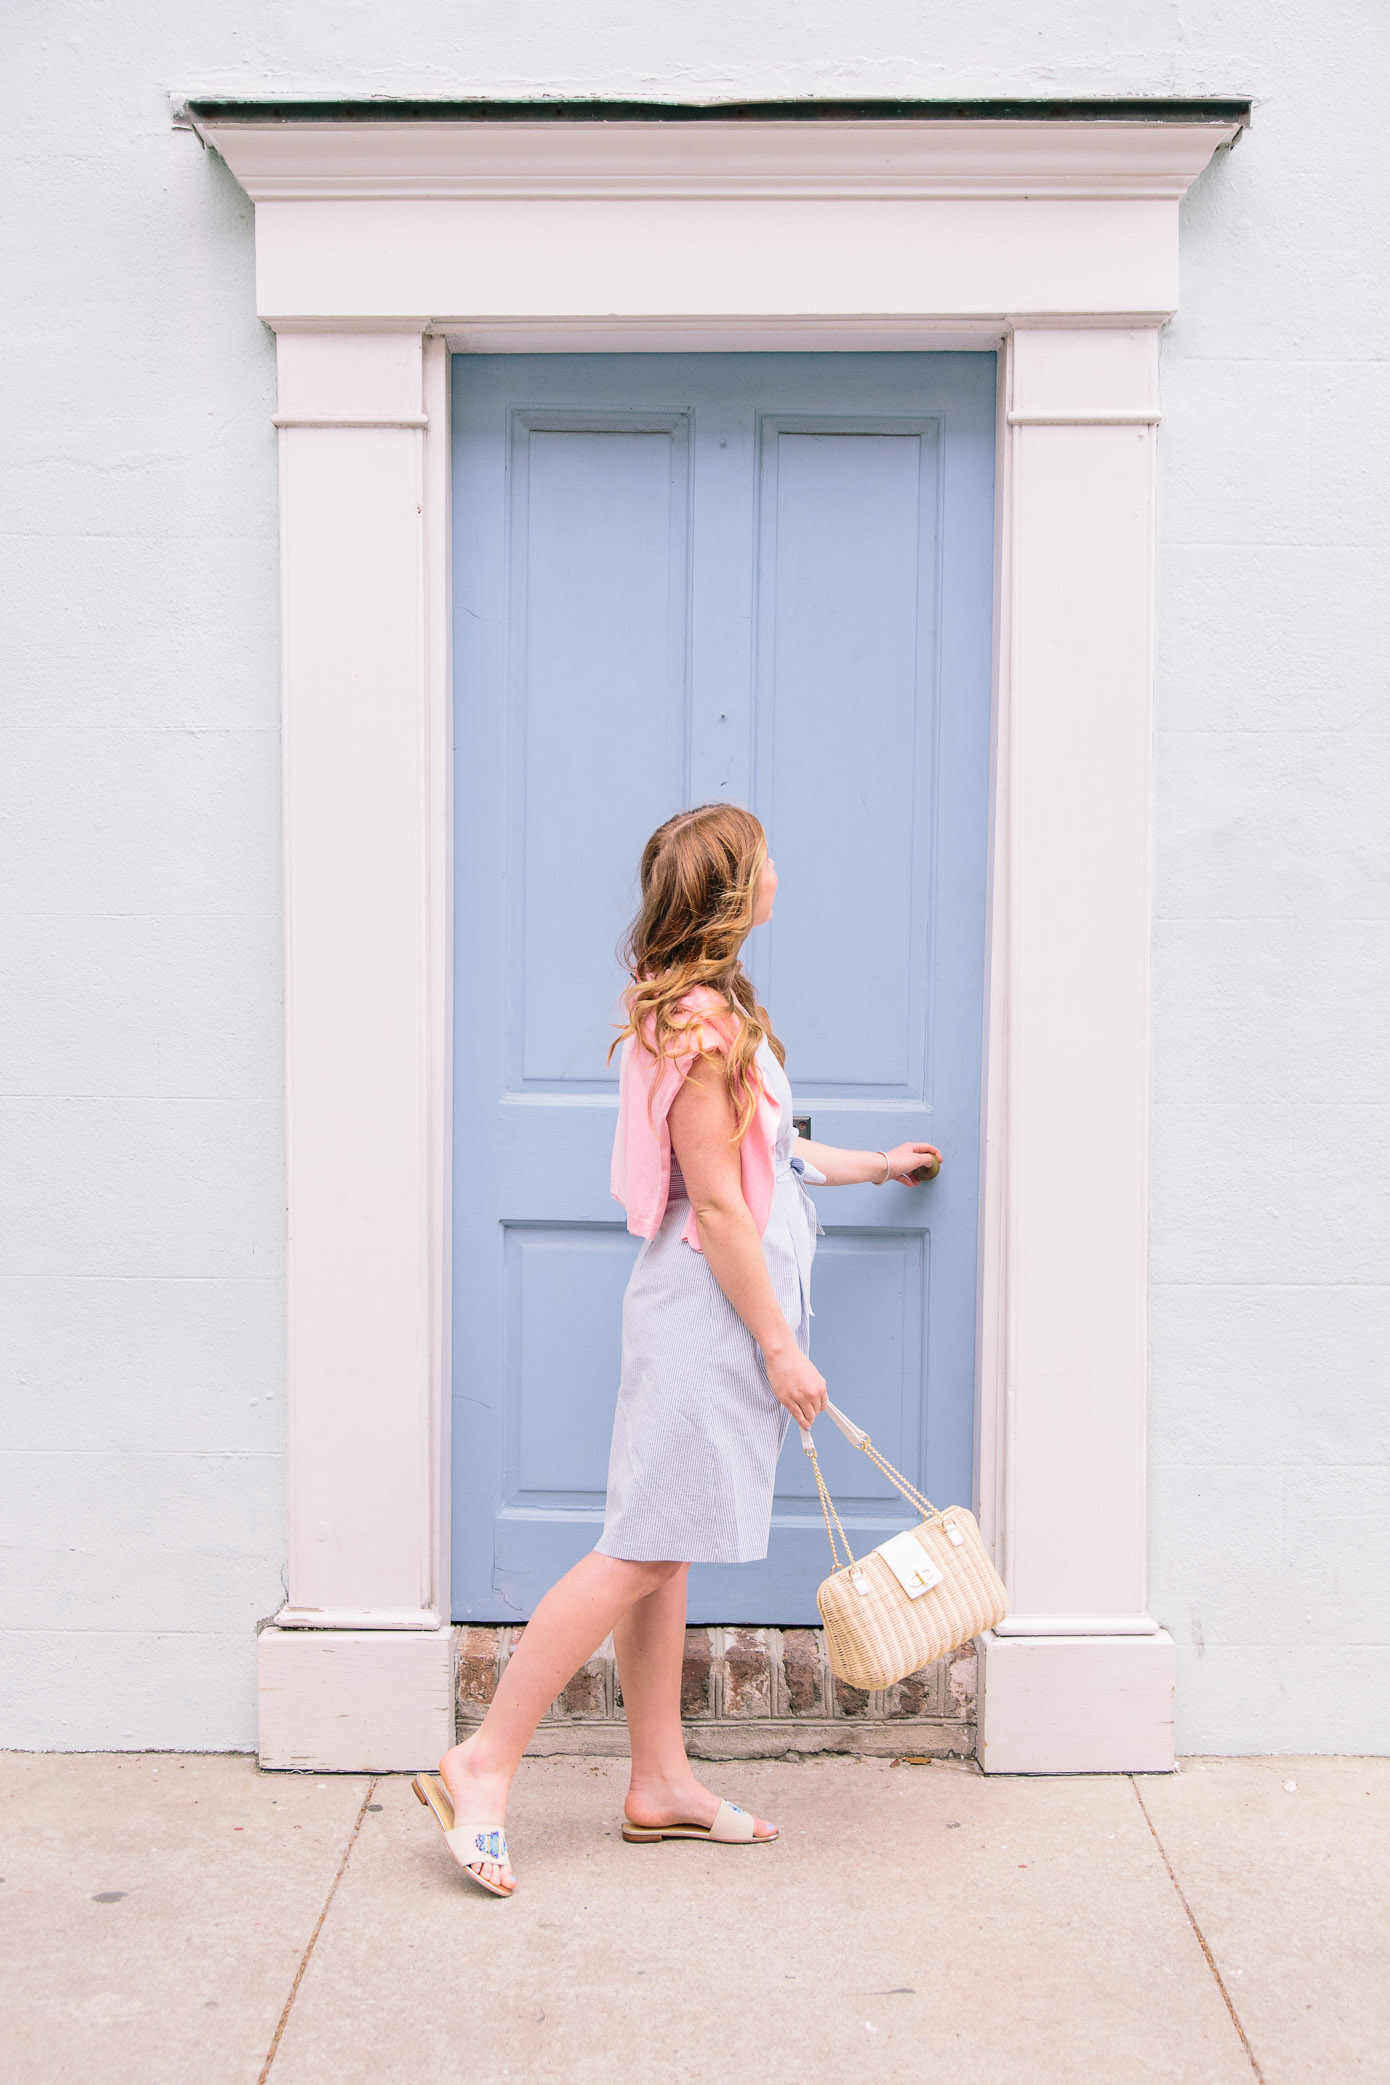 Seersucker Fit and Flare Dress, Millennial Pink Sweater | Talbots Friends & Family Event | Louella Reese Life & Style Blog